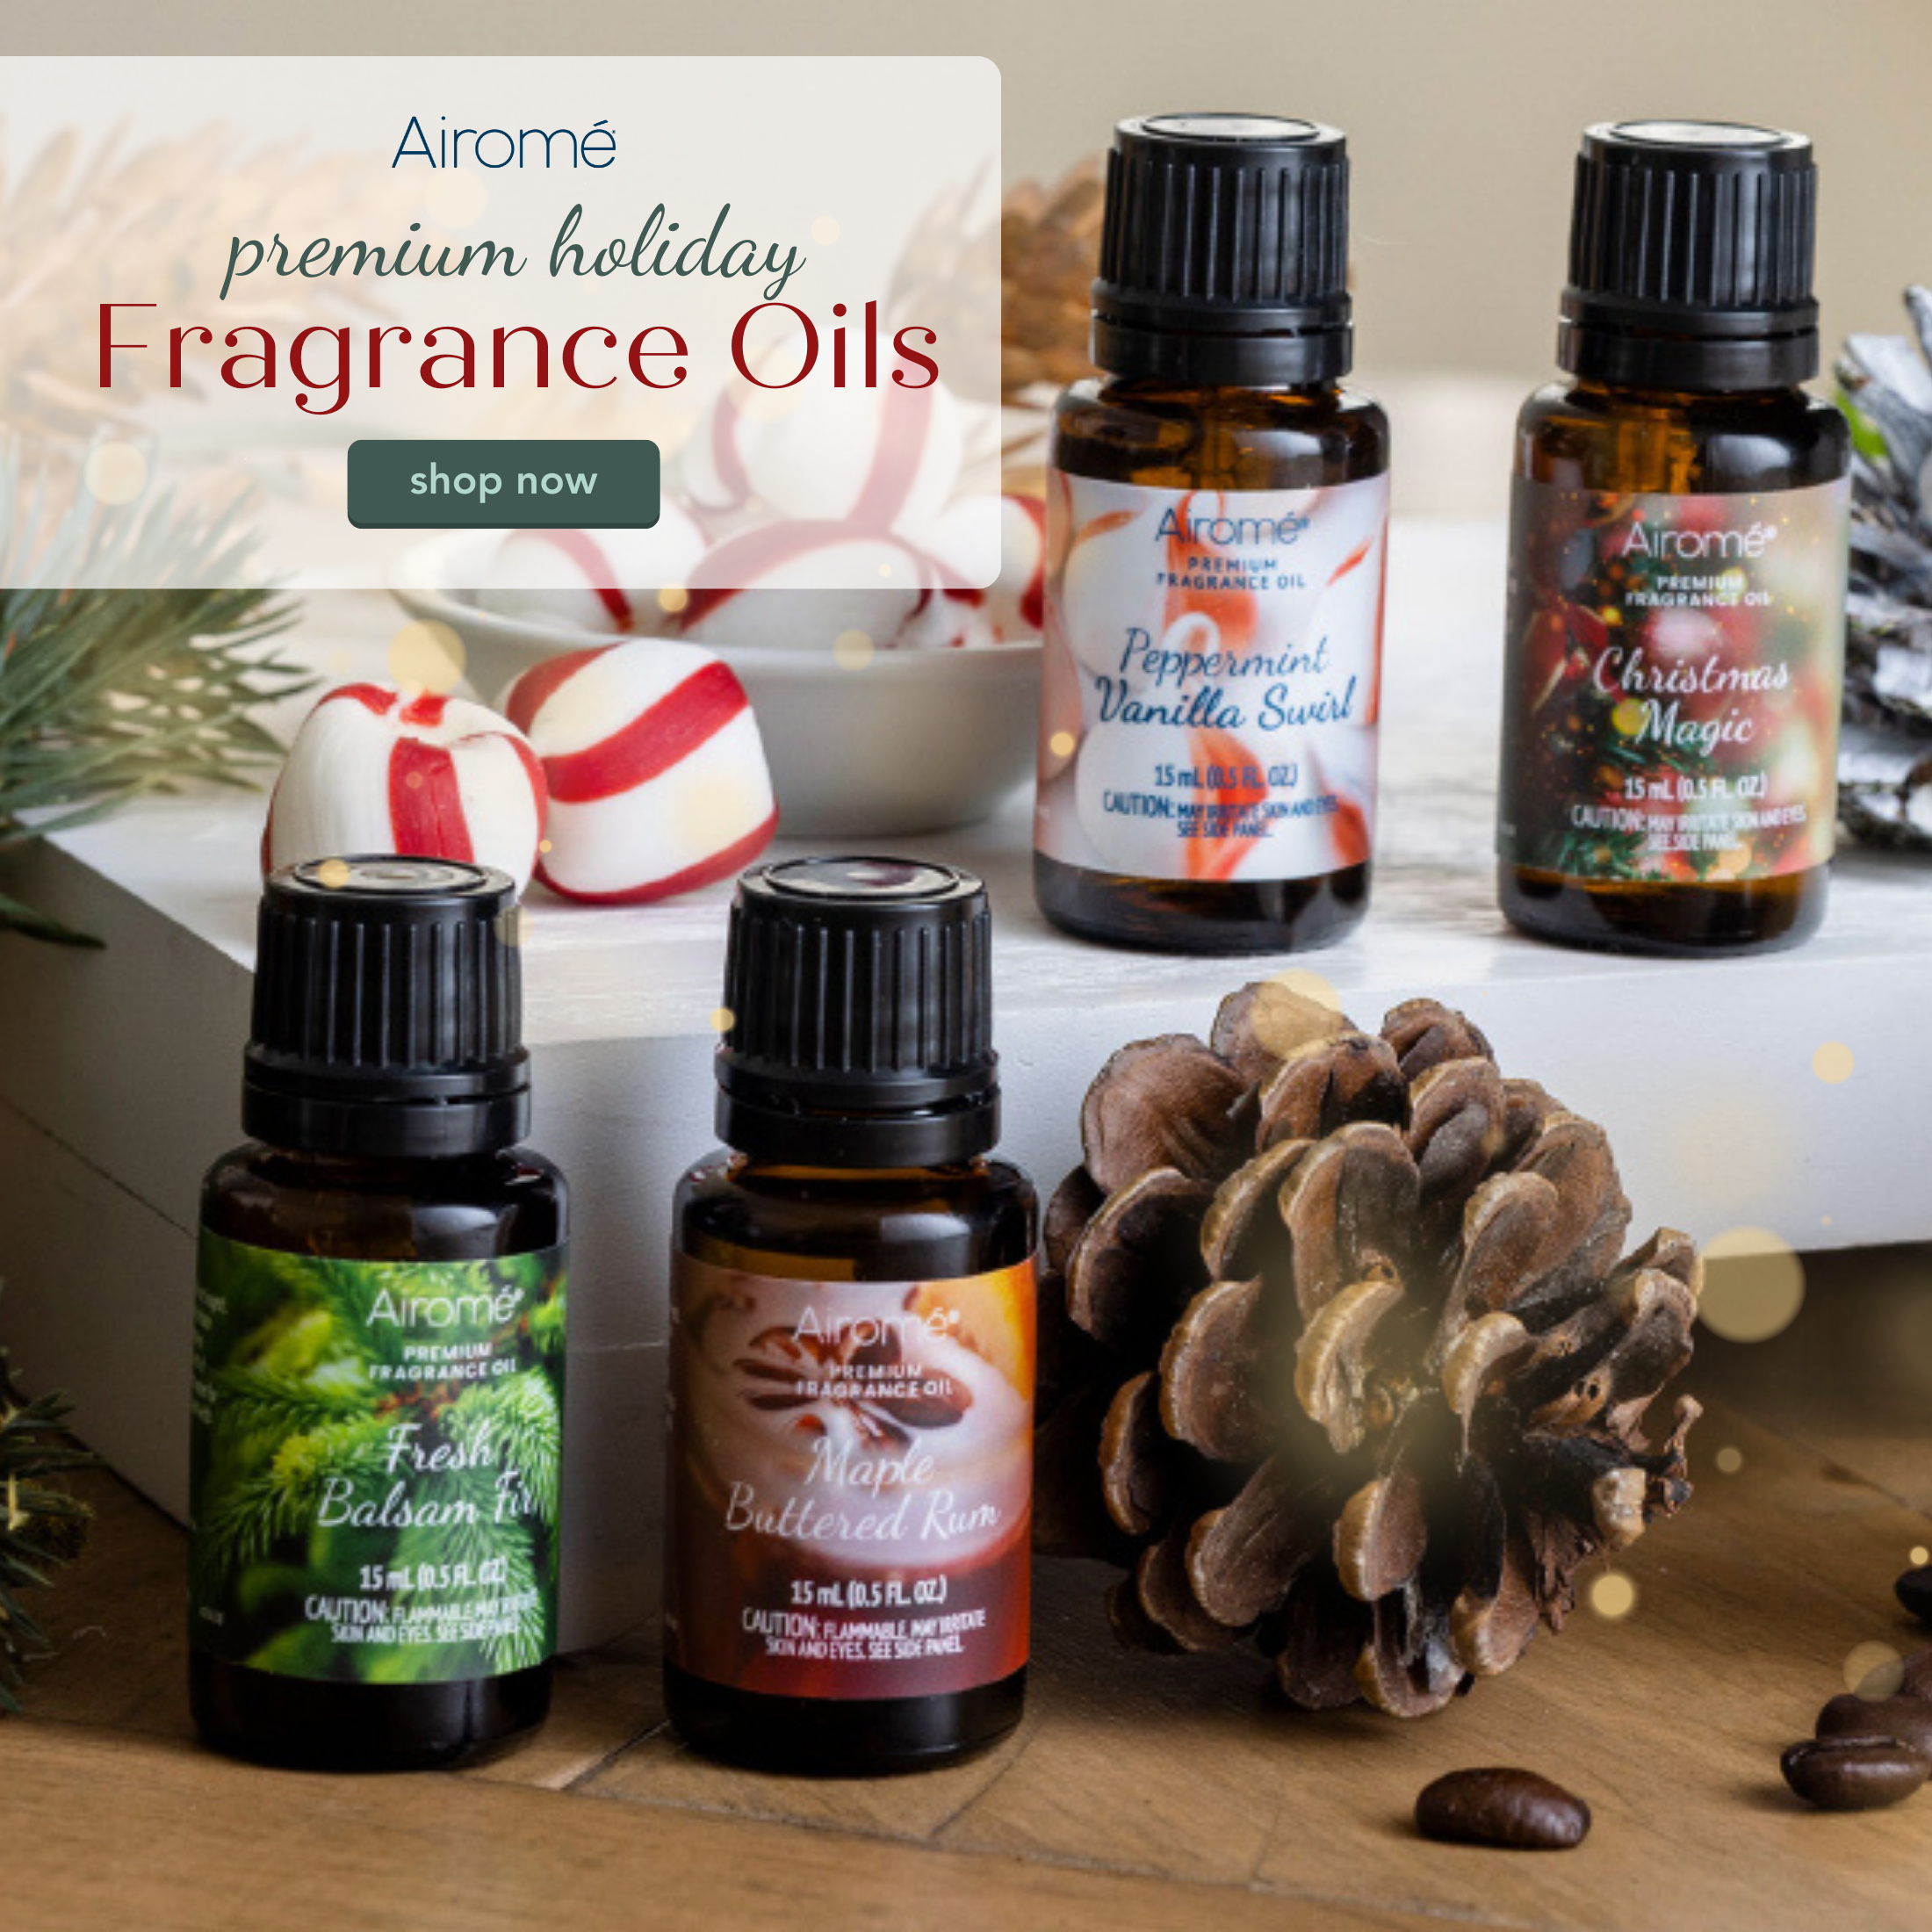 Premium Fragrance Oils for the Holidays